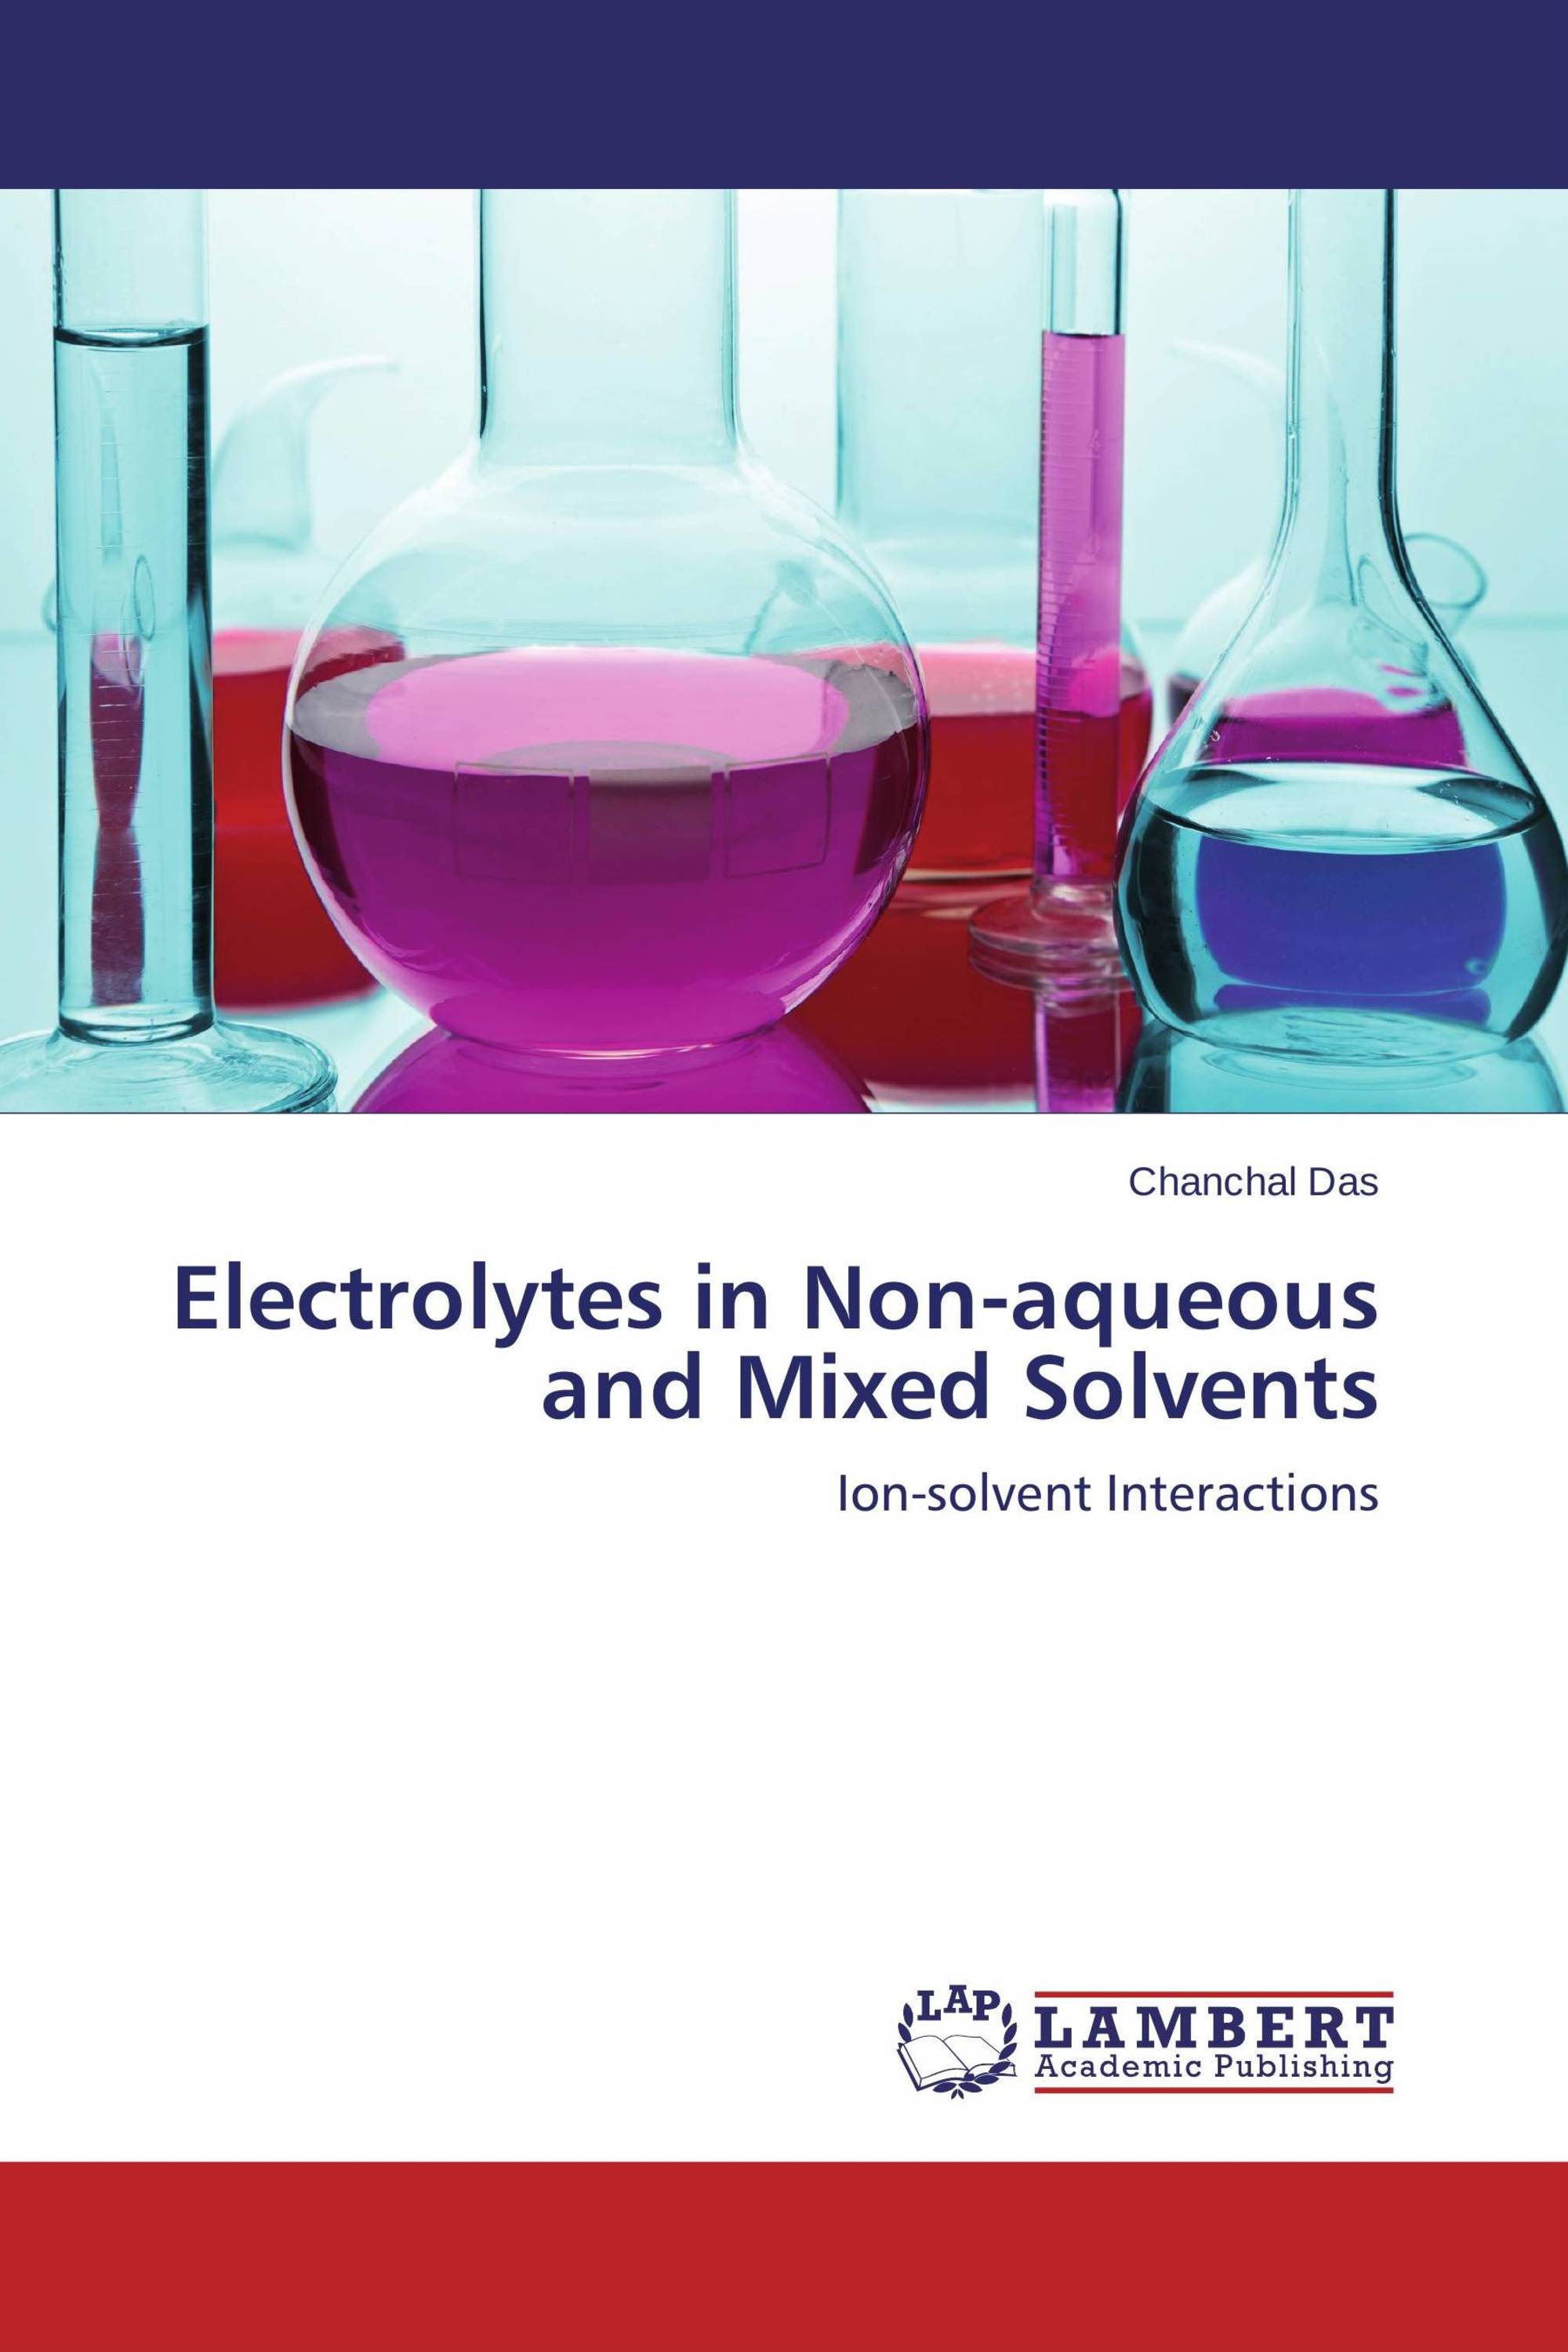 Electrolytes in Non-aqueous and Mixed Solvents